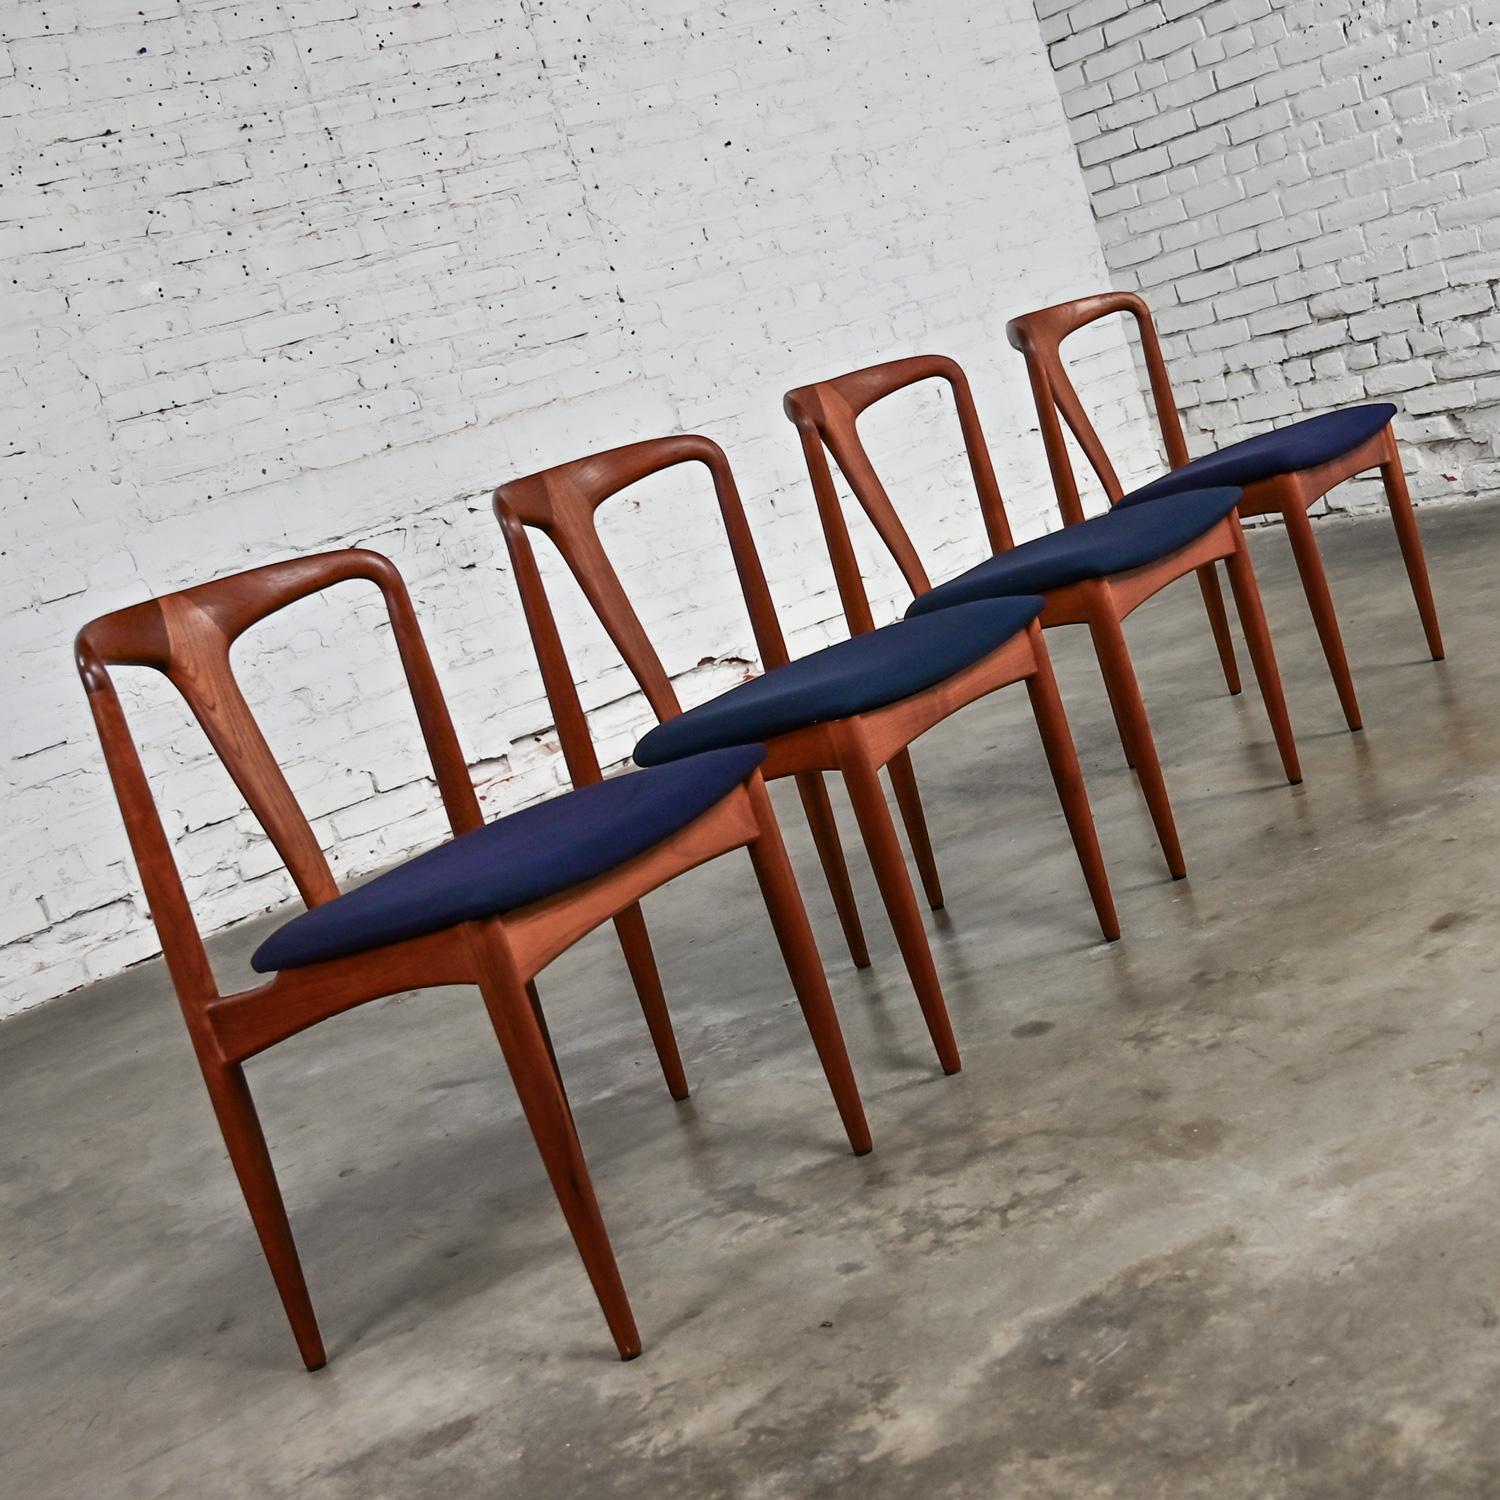 Wonderful 1960’s Mid Century Scandinavian Modern dining chairs Attributed to Johannes Andersen Juliane chair, set of 4 comprised of teak frames and new black canvas fabric seats. This piece has been attributed based upon archived research including